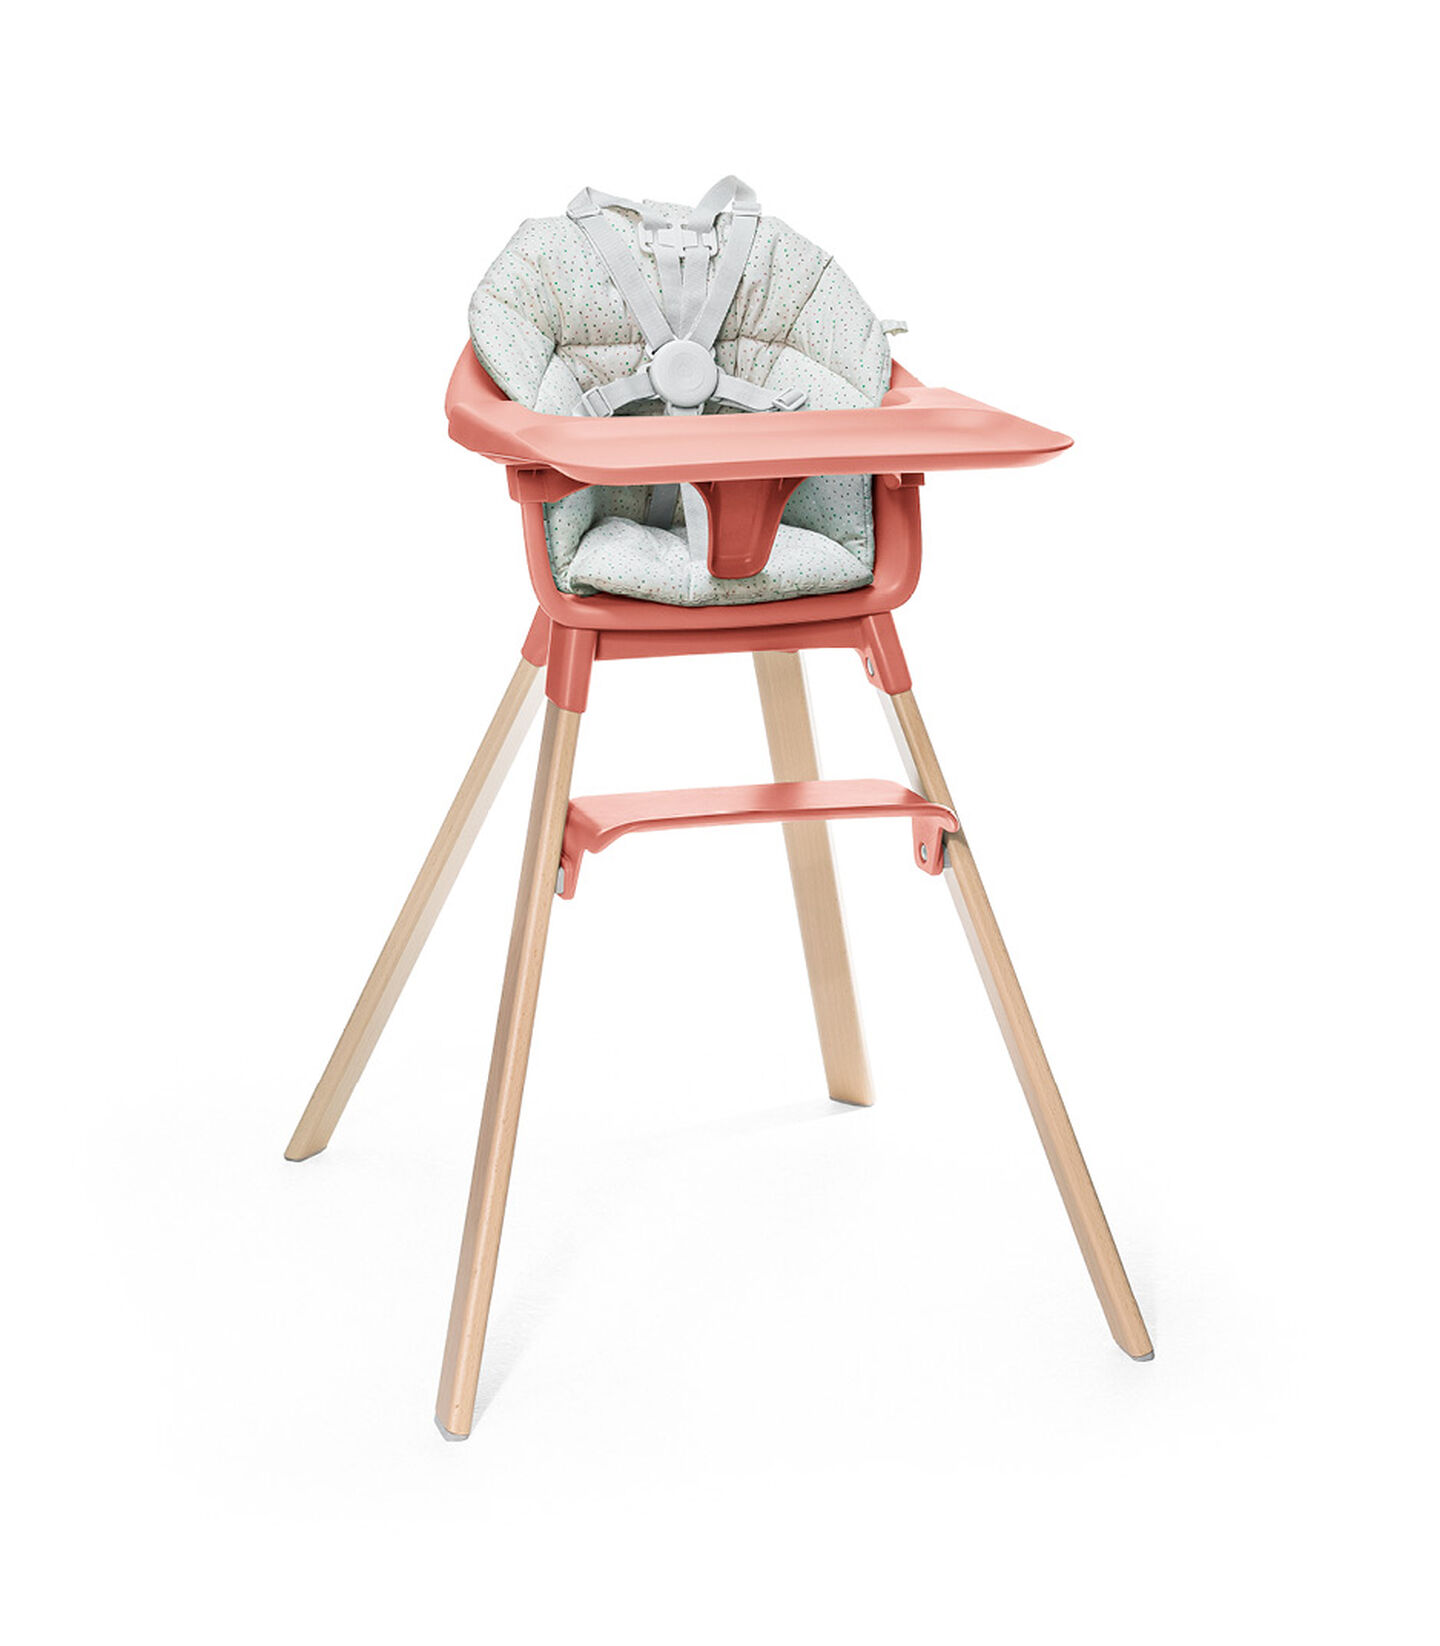 Stokke® Clikk™ High Chair. Natural Beech wood and Sunny Coral plastic parts including Tray. Cushion Grey Sprinkle and Harness. view 6